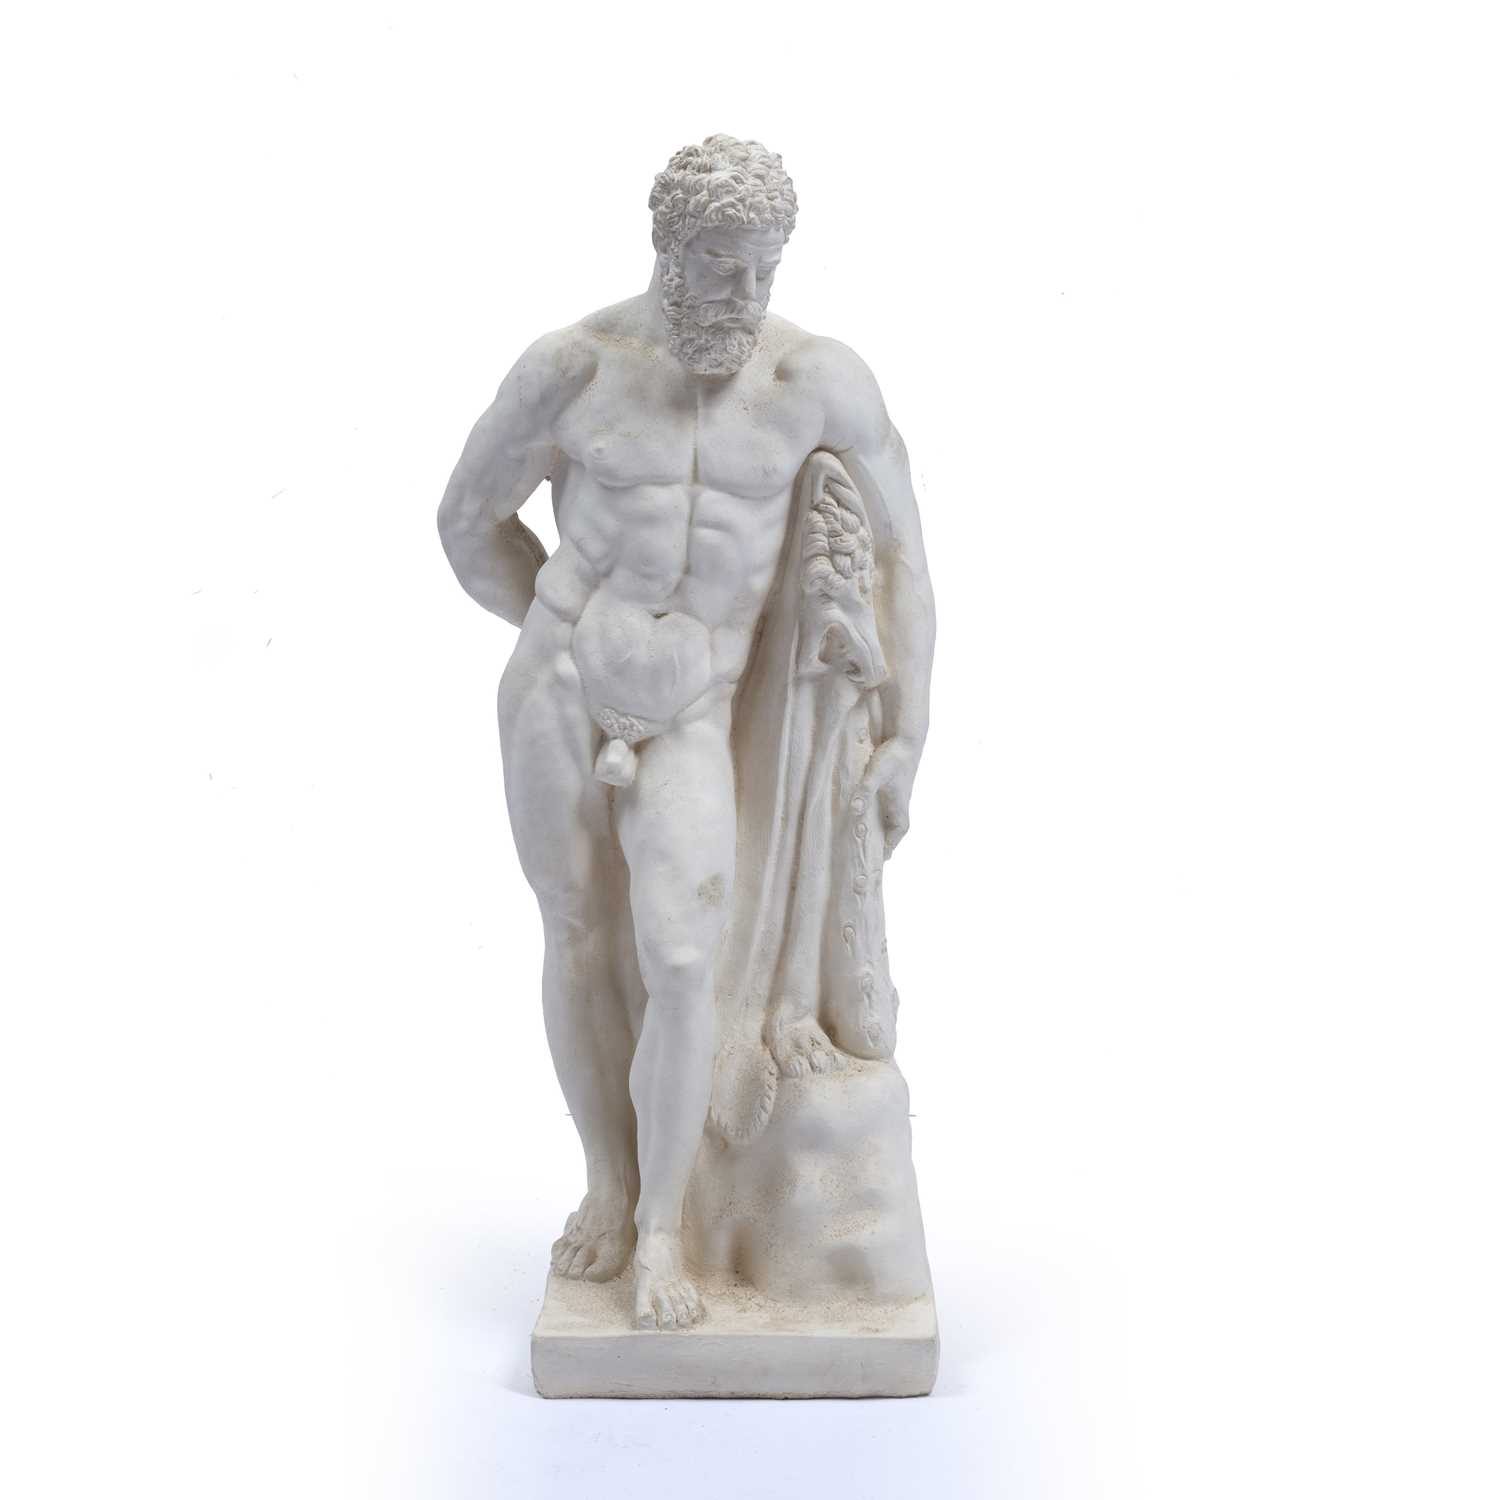 A plaster replica of the Farnese Hercules, the subject leaning on his club draped in a lion skin,